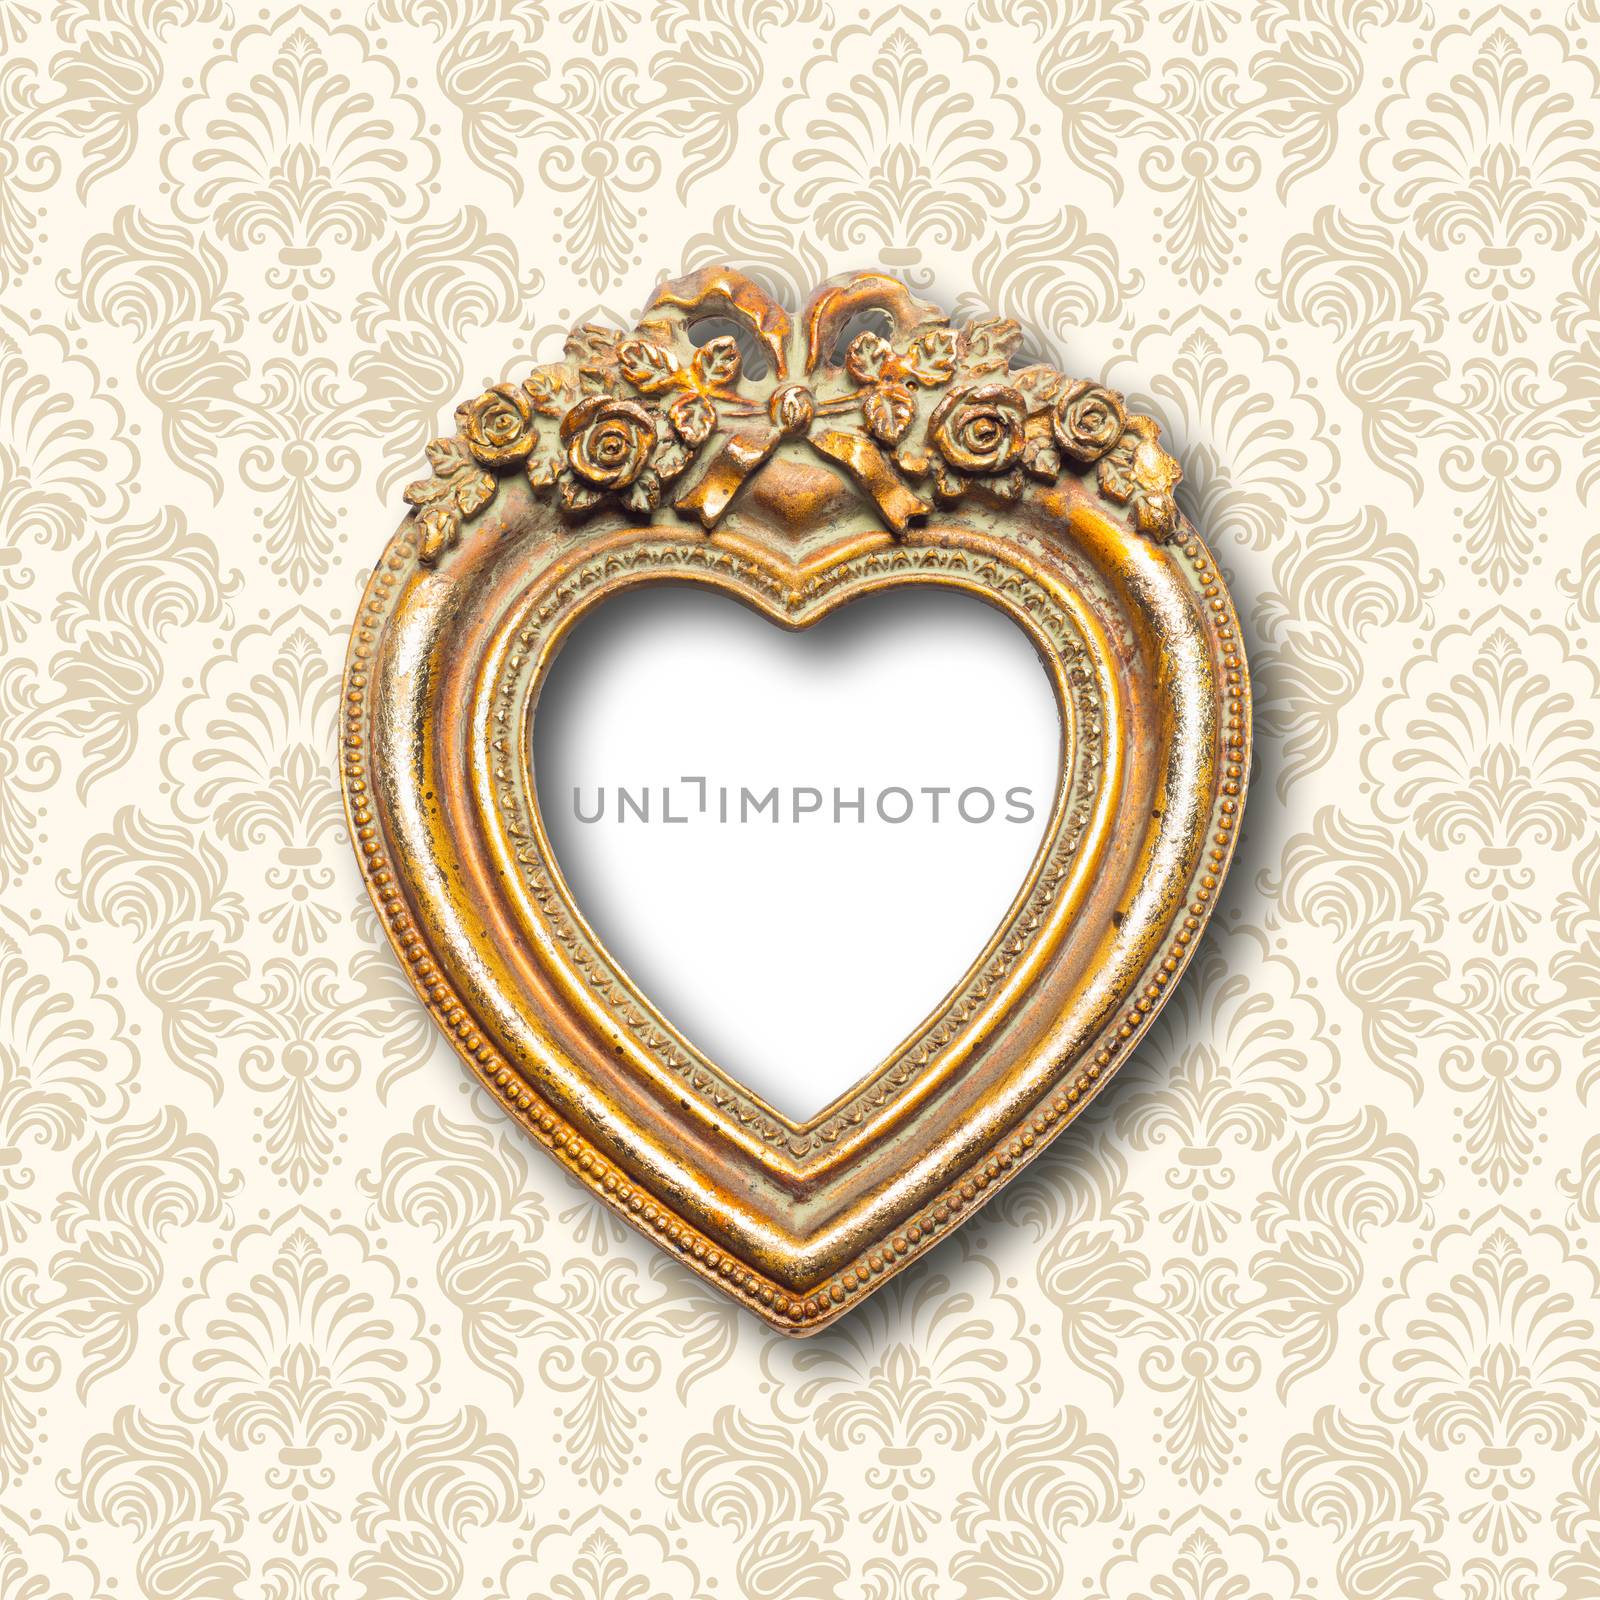 Old memories - old gold heart shape picture frame on pattern wall